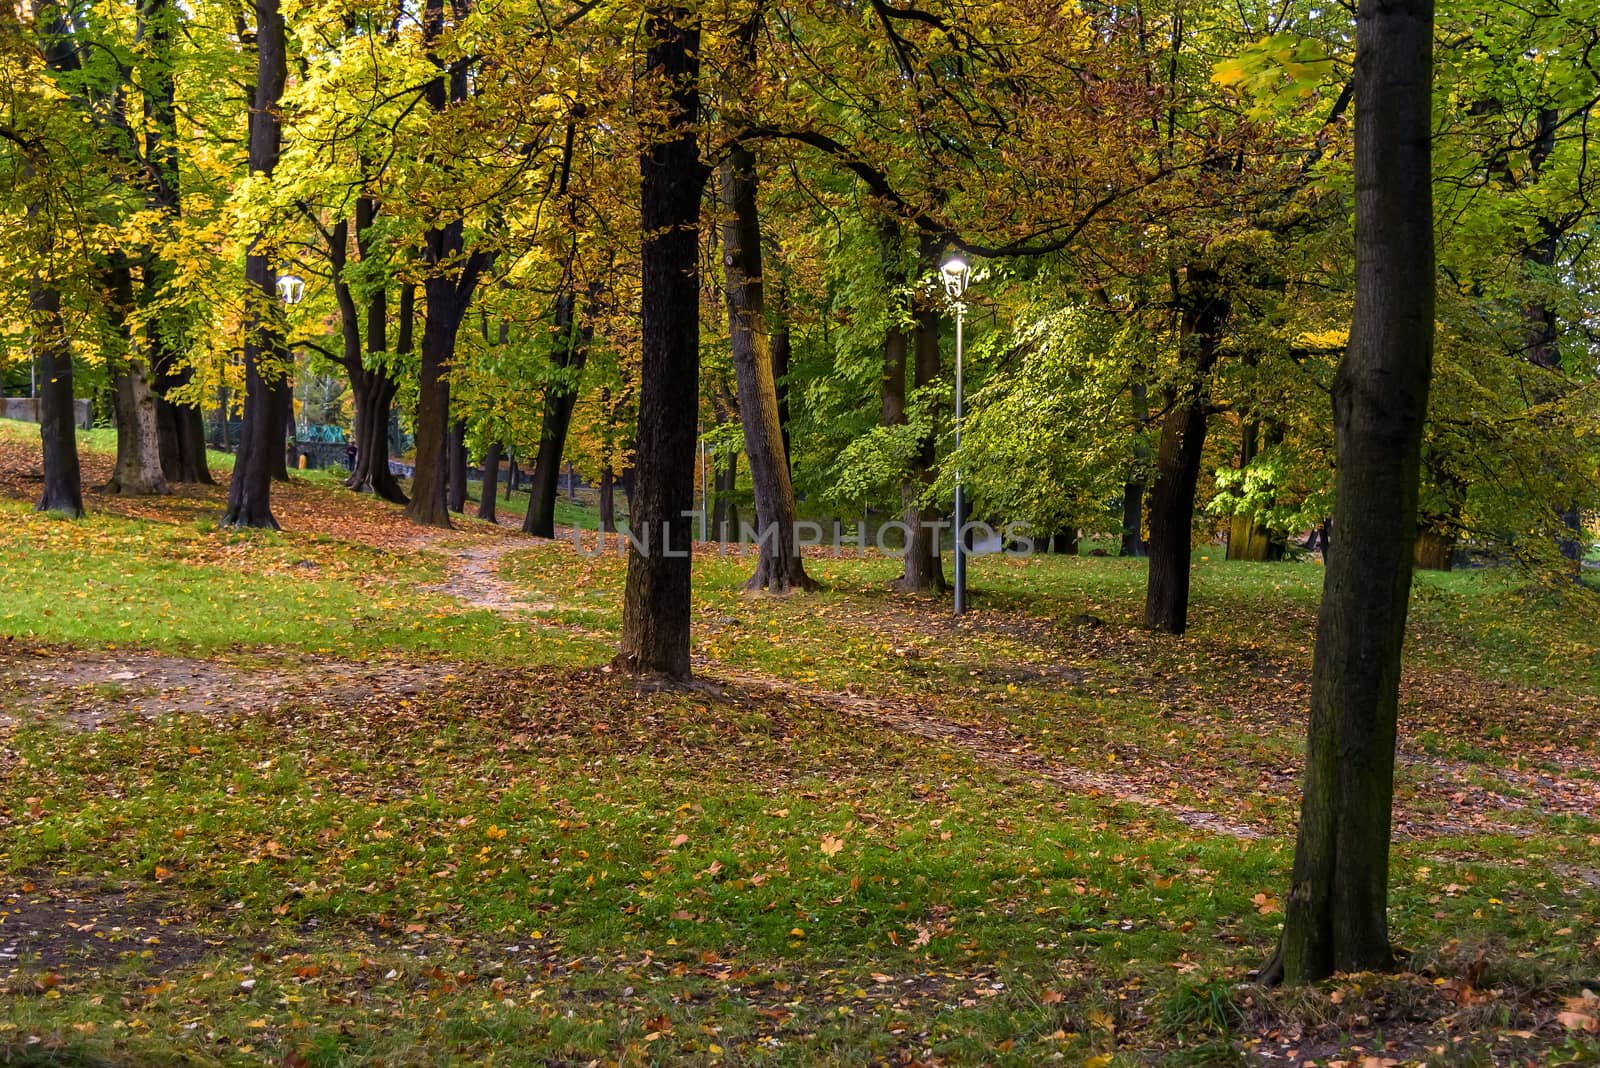 Evening view of the colorful park in autumn